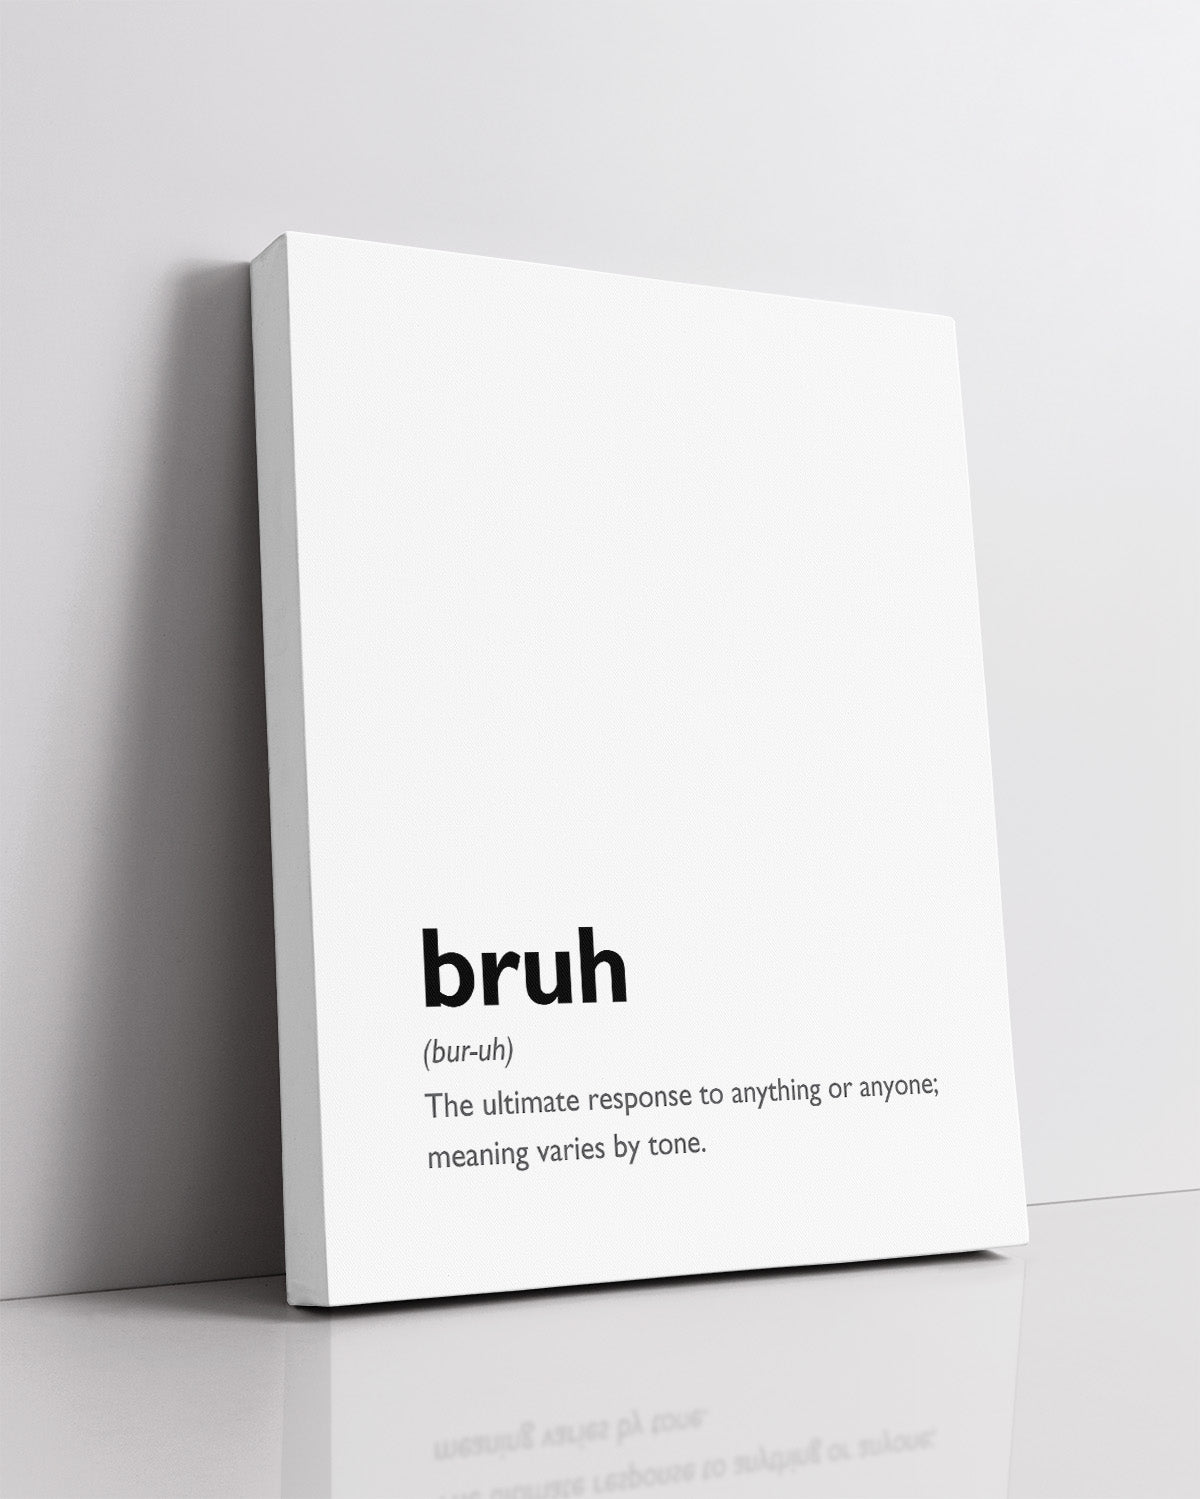 Bruh Definition Wall Art - Funny Gift for Boys, Teens, Men - Modern Typography Wall Decor - Cubicle, Office Wall Decor - Dorm Room Wall Art - Boys Bedroom Decorations